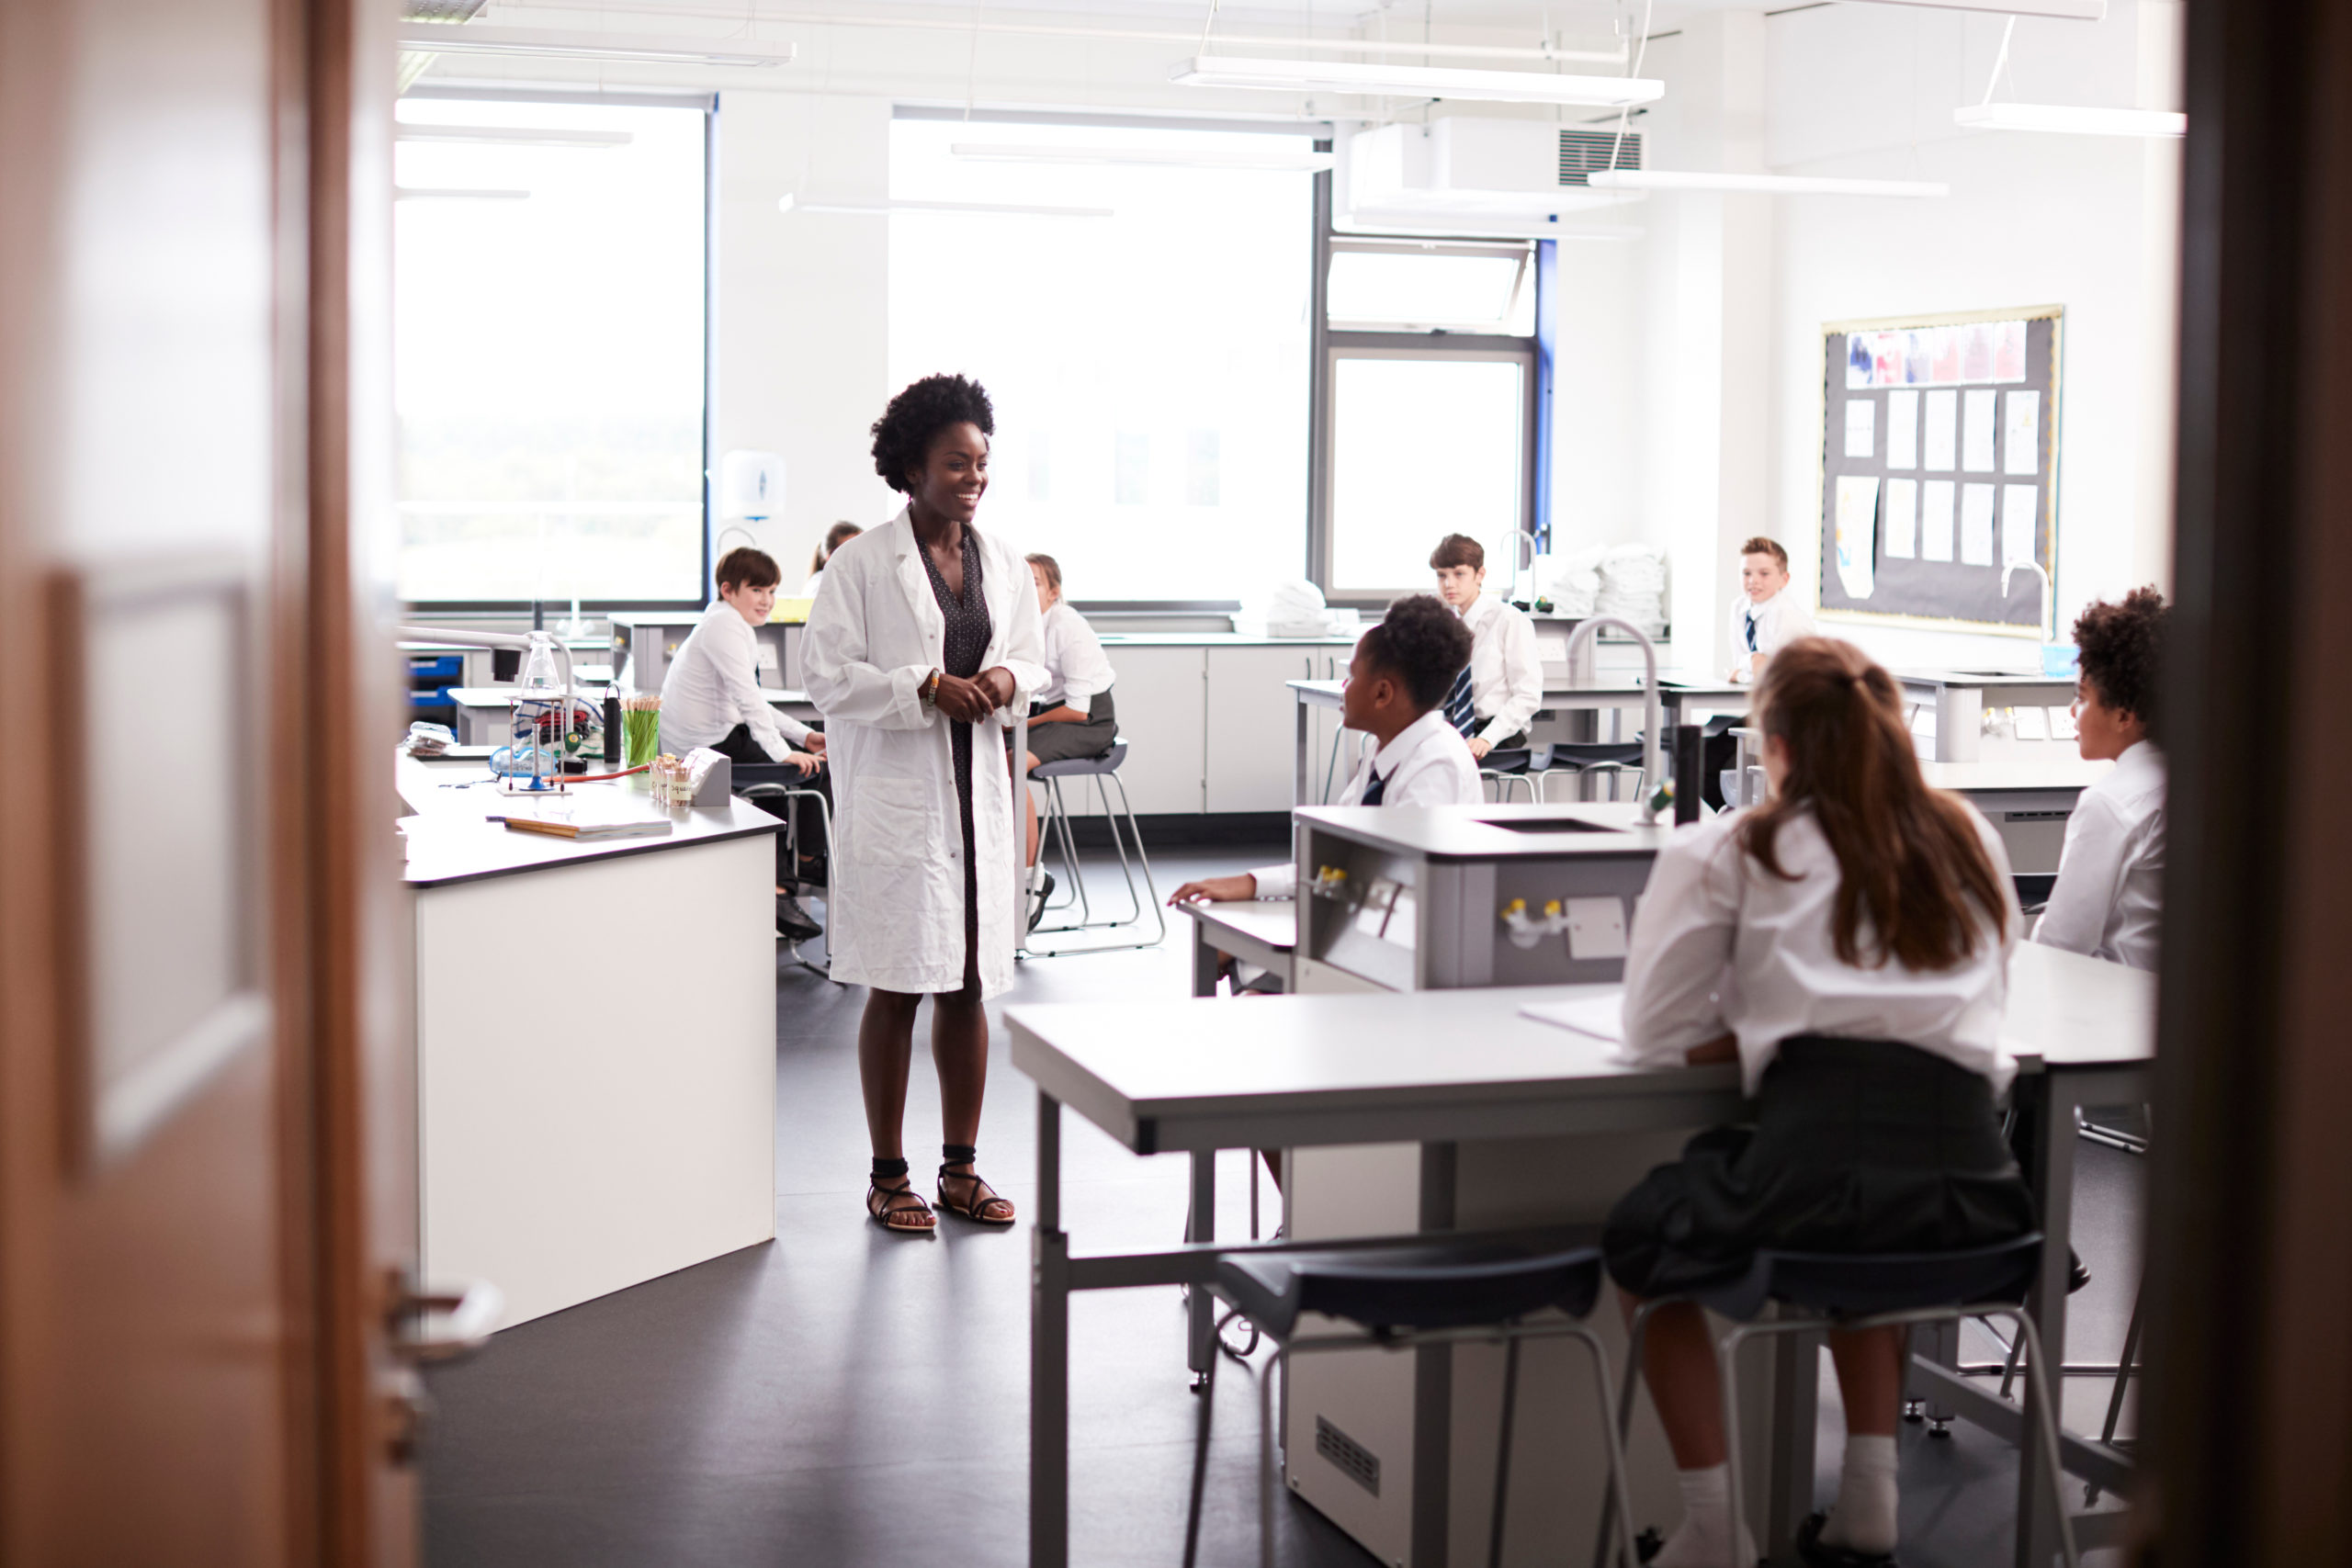 Teacher in a High School Science Lab Class, wearing a lab coat, teaching students who are wearing uniforms of white shirts and dark skirts and pants